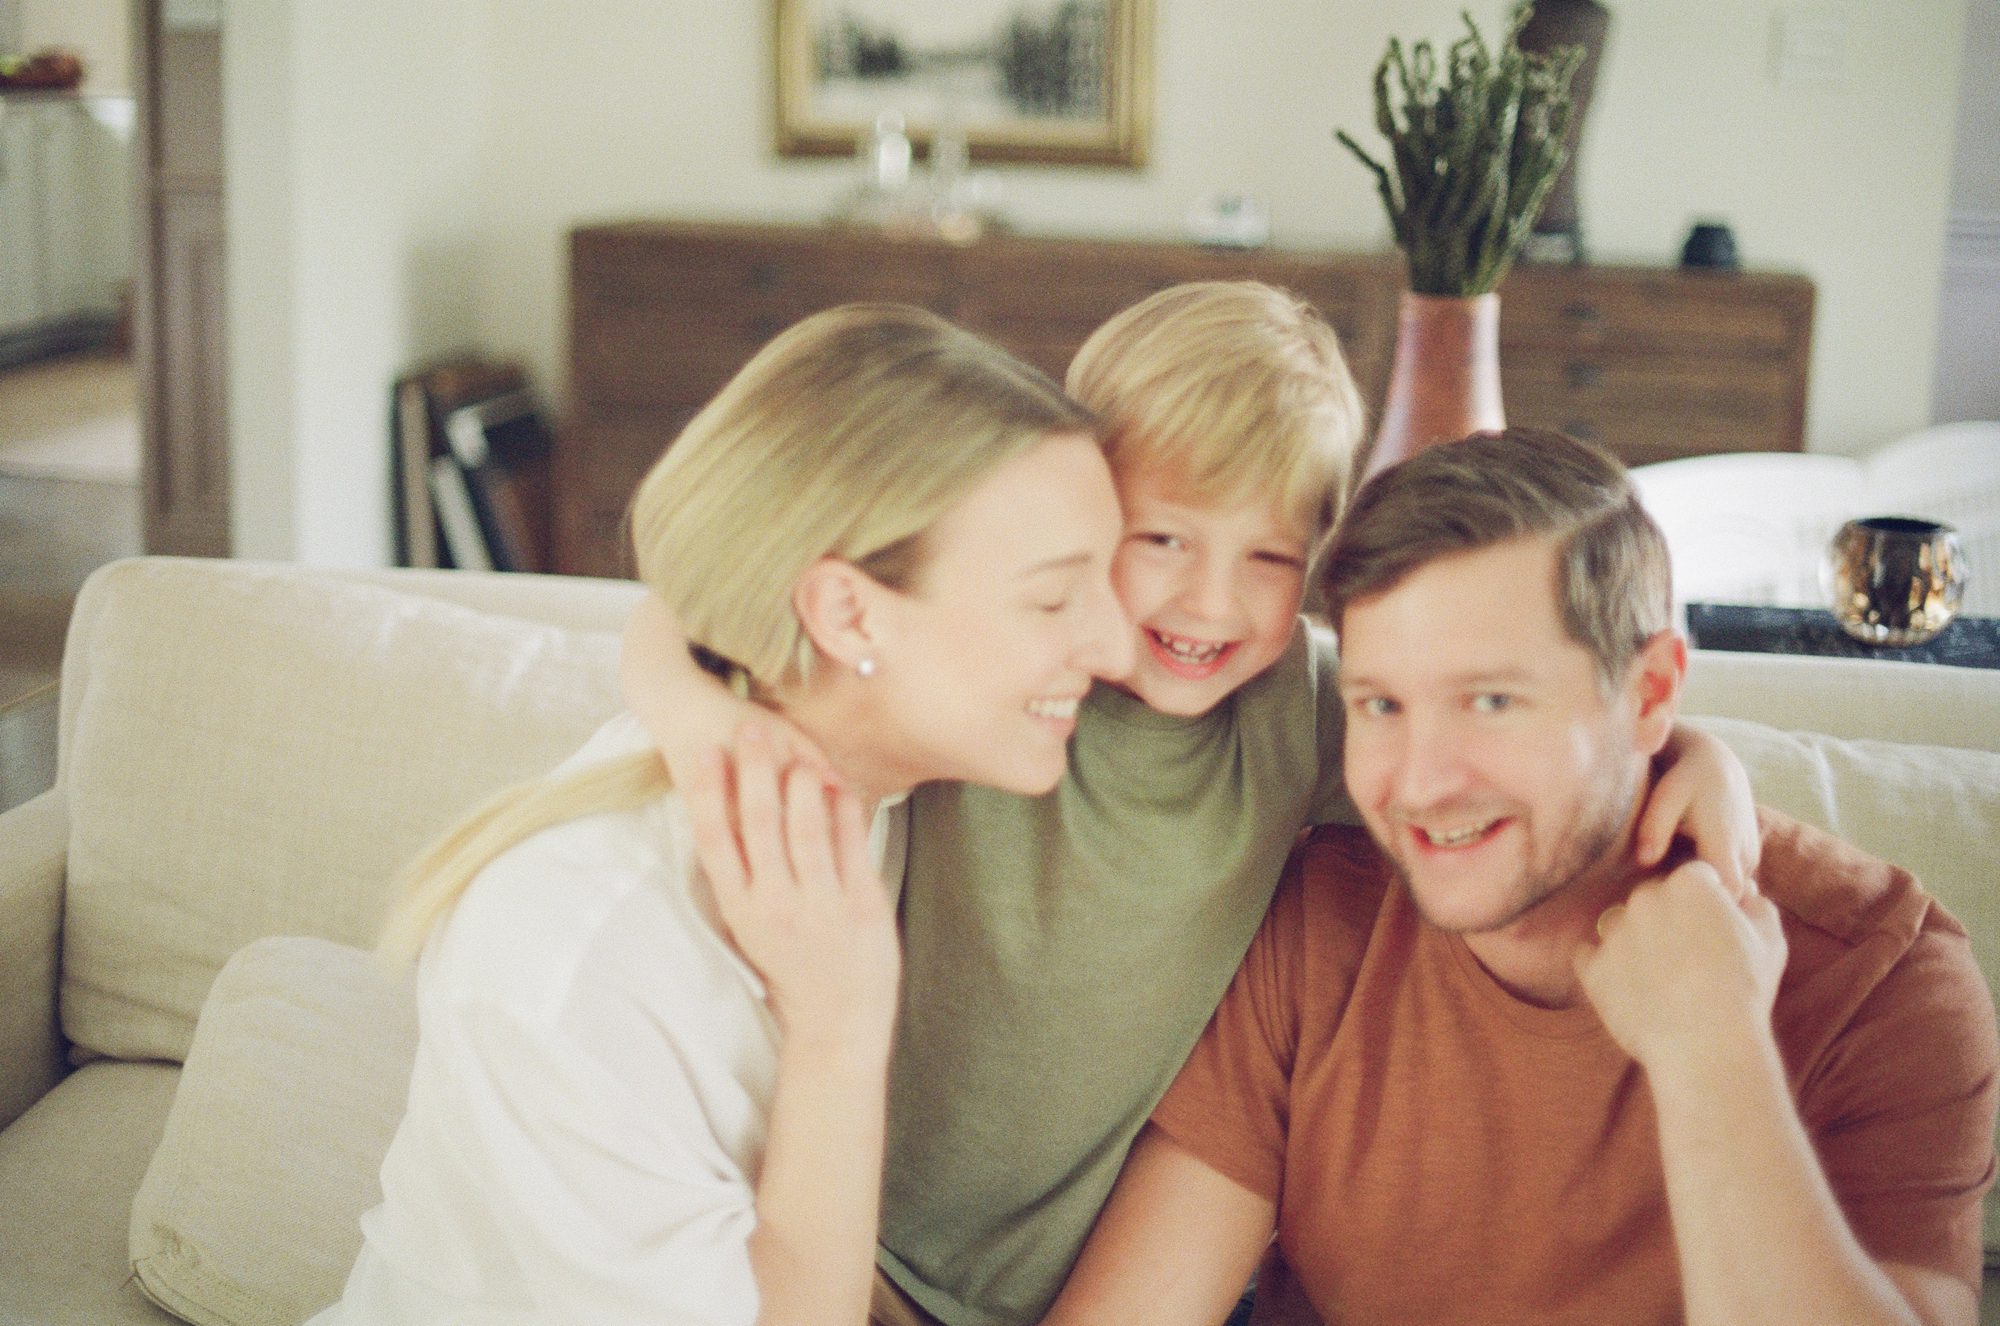 The family hugged during their in-home photo shoot by Chicago photographer Christy Tyler